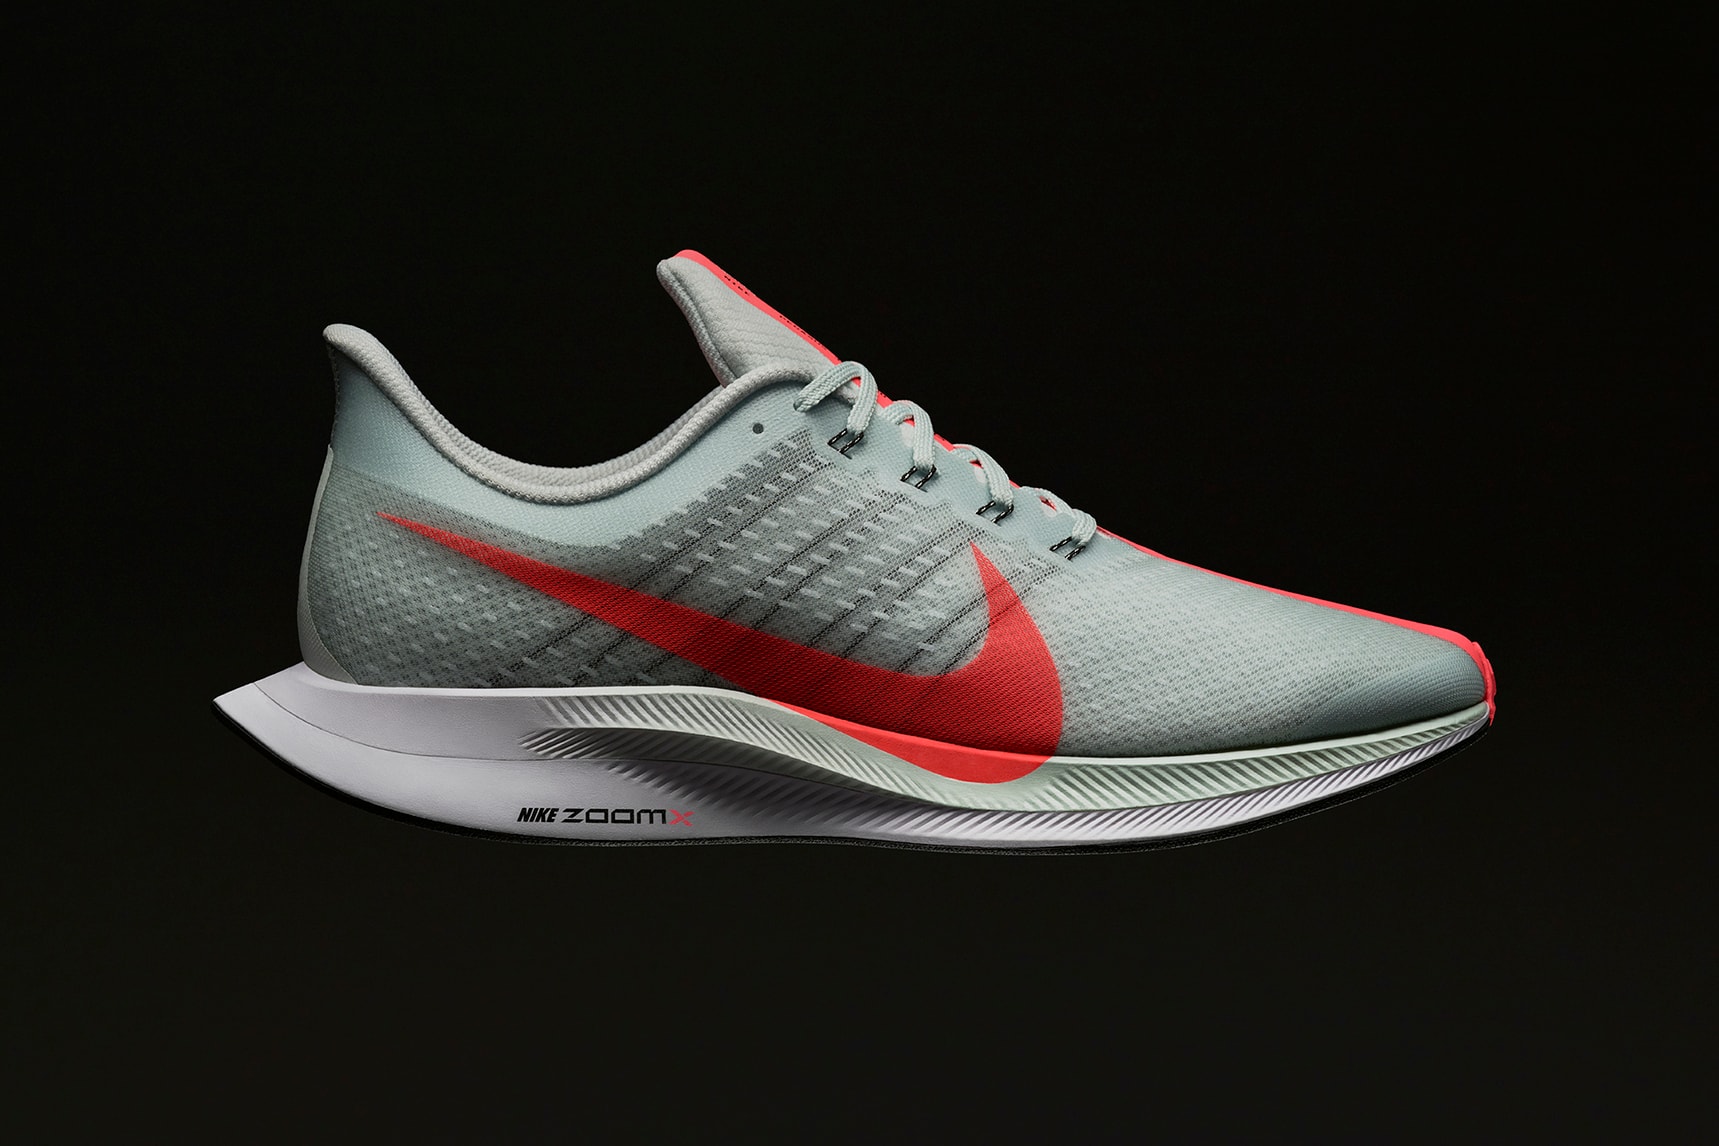 Nike Zoom Pegasus Turbo First Closer Look Coming Soon Sneakers Kicks Shoes Trainers Running Athletic Sprinting Jogging Fitness